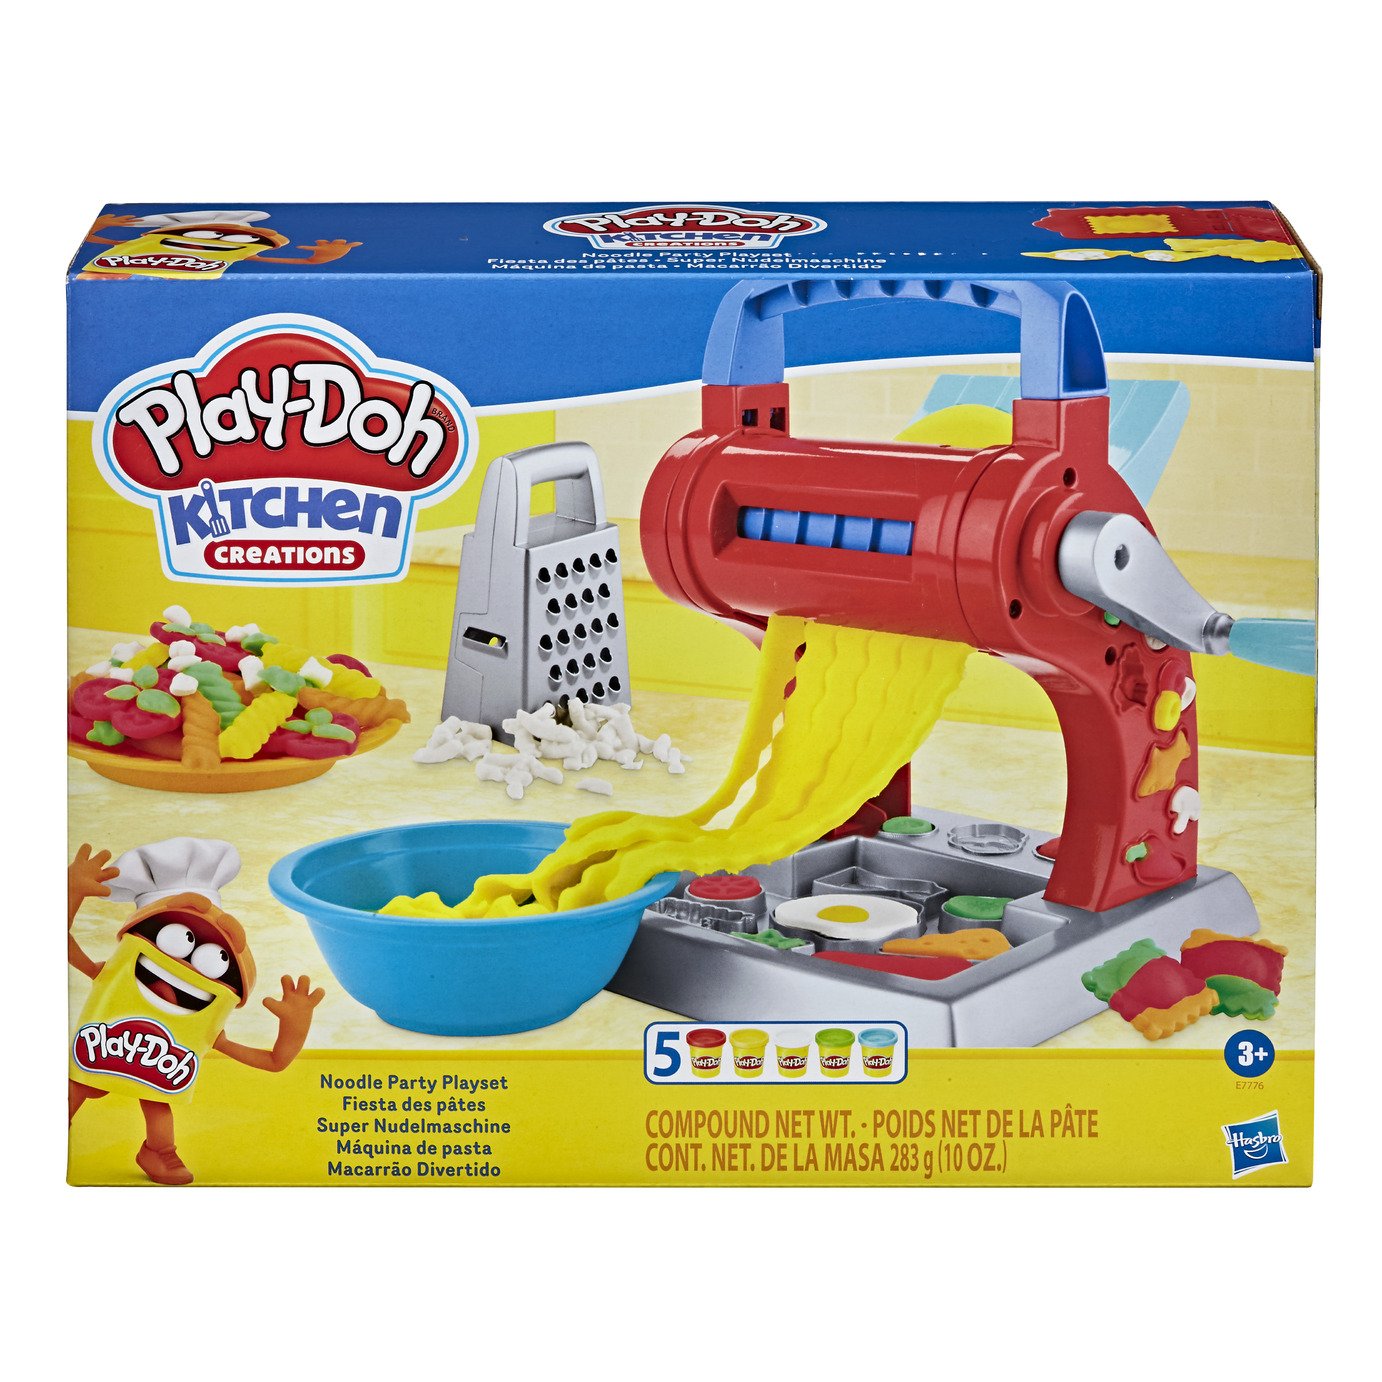 Play-Doh Kitchen Creations Noodle Party Playset Review